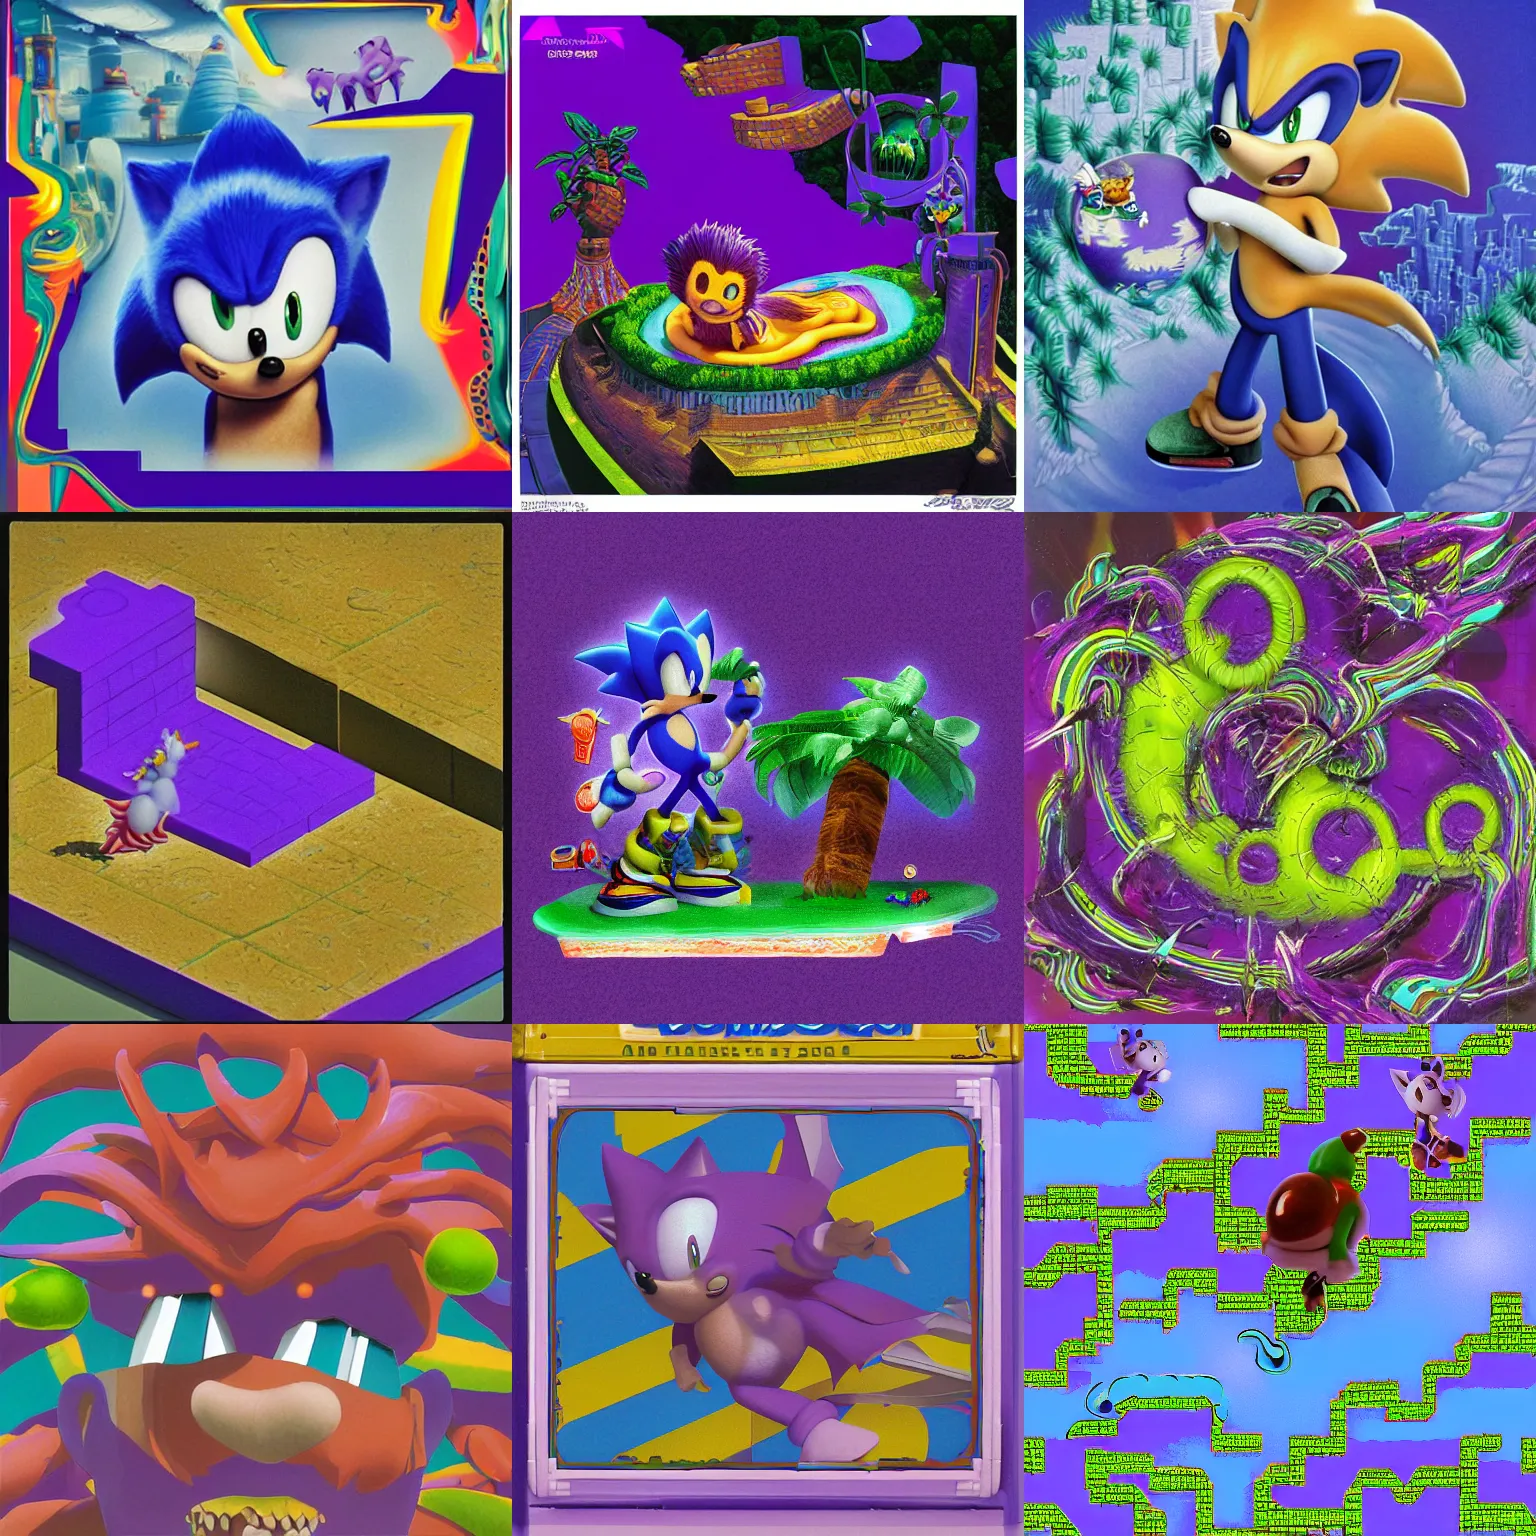 Prompt: dreaming of portrait of sonic hedgehog deconstructivist claymation and a matte painting landscape of a surreal sharp, detailed professional soft pastels high quality airbrush art album cover of a liquid dissolving airbrush portrait art lsd sonic the hedgehog swimming through cyberspace purple portrait checkerboard background 1 9 9 0 s 1 9 9 2 sega genesis video game album cover